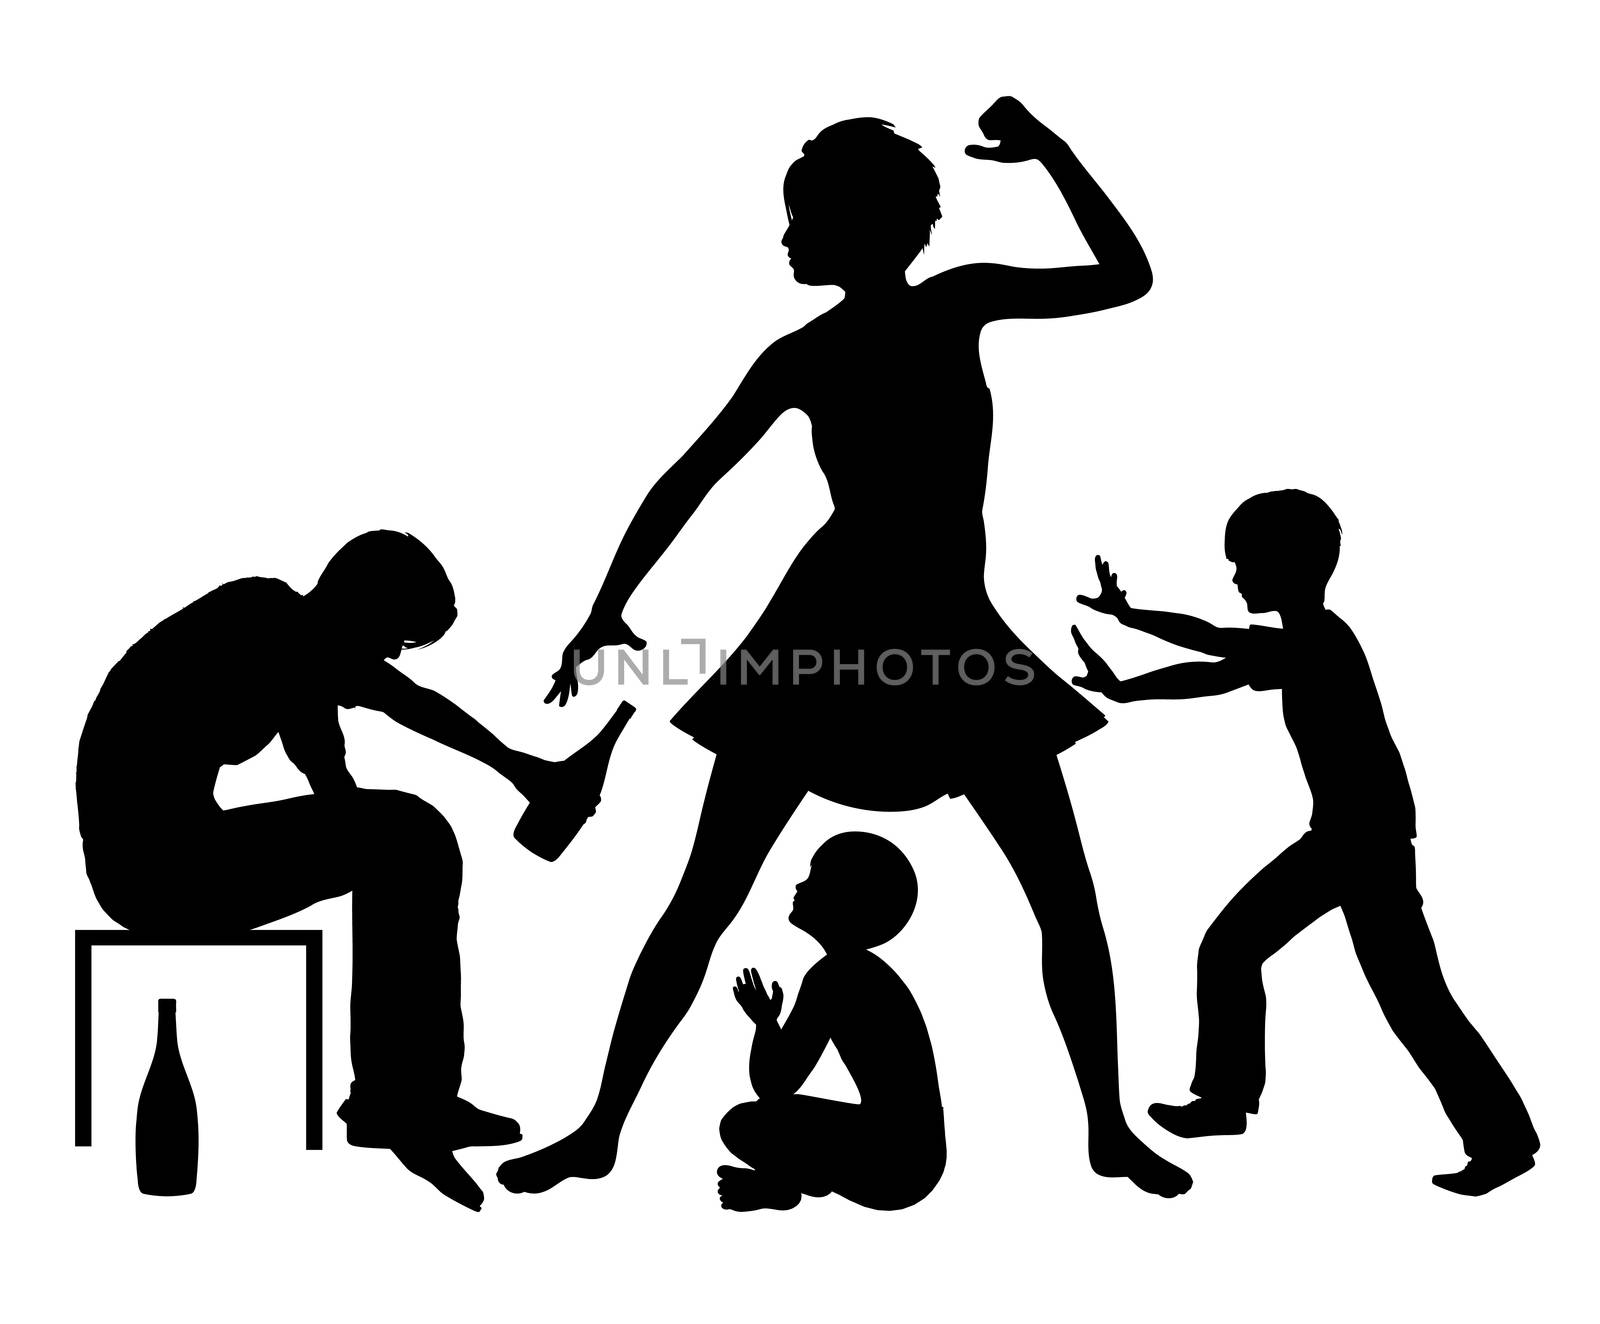 Violent family conflict due to the alcohol addiction